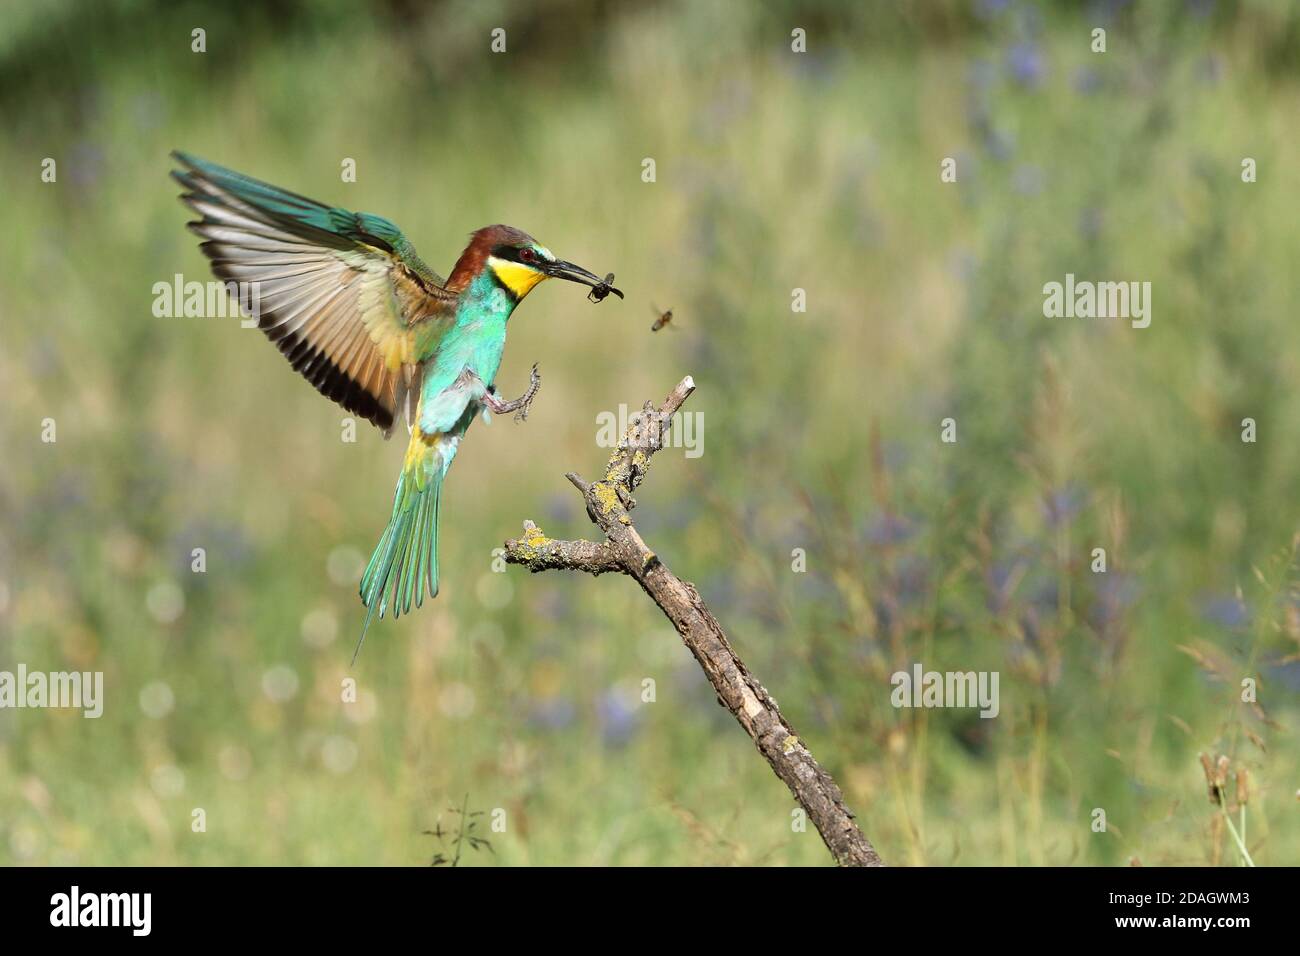 European bee eater (Merops apiaster), landing on a branch with an insect in the bill, Hungary, Kiskunsag National Park Stock Photo